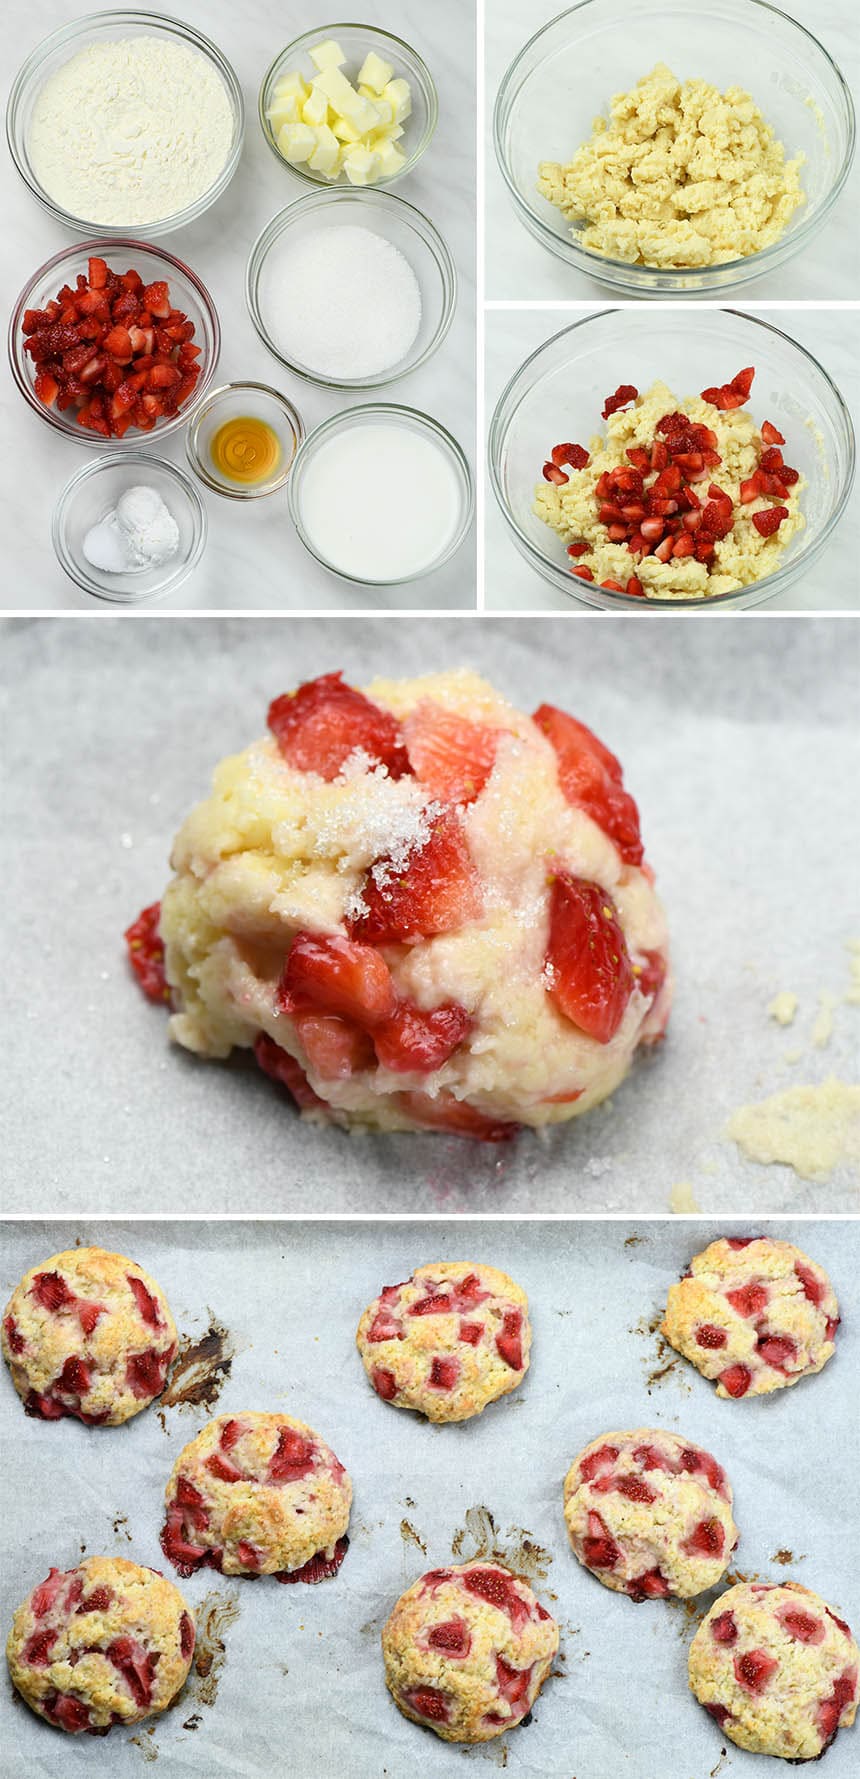 Couple of Strawberry Shortcake Cookies preparation images.